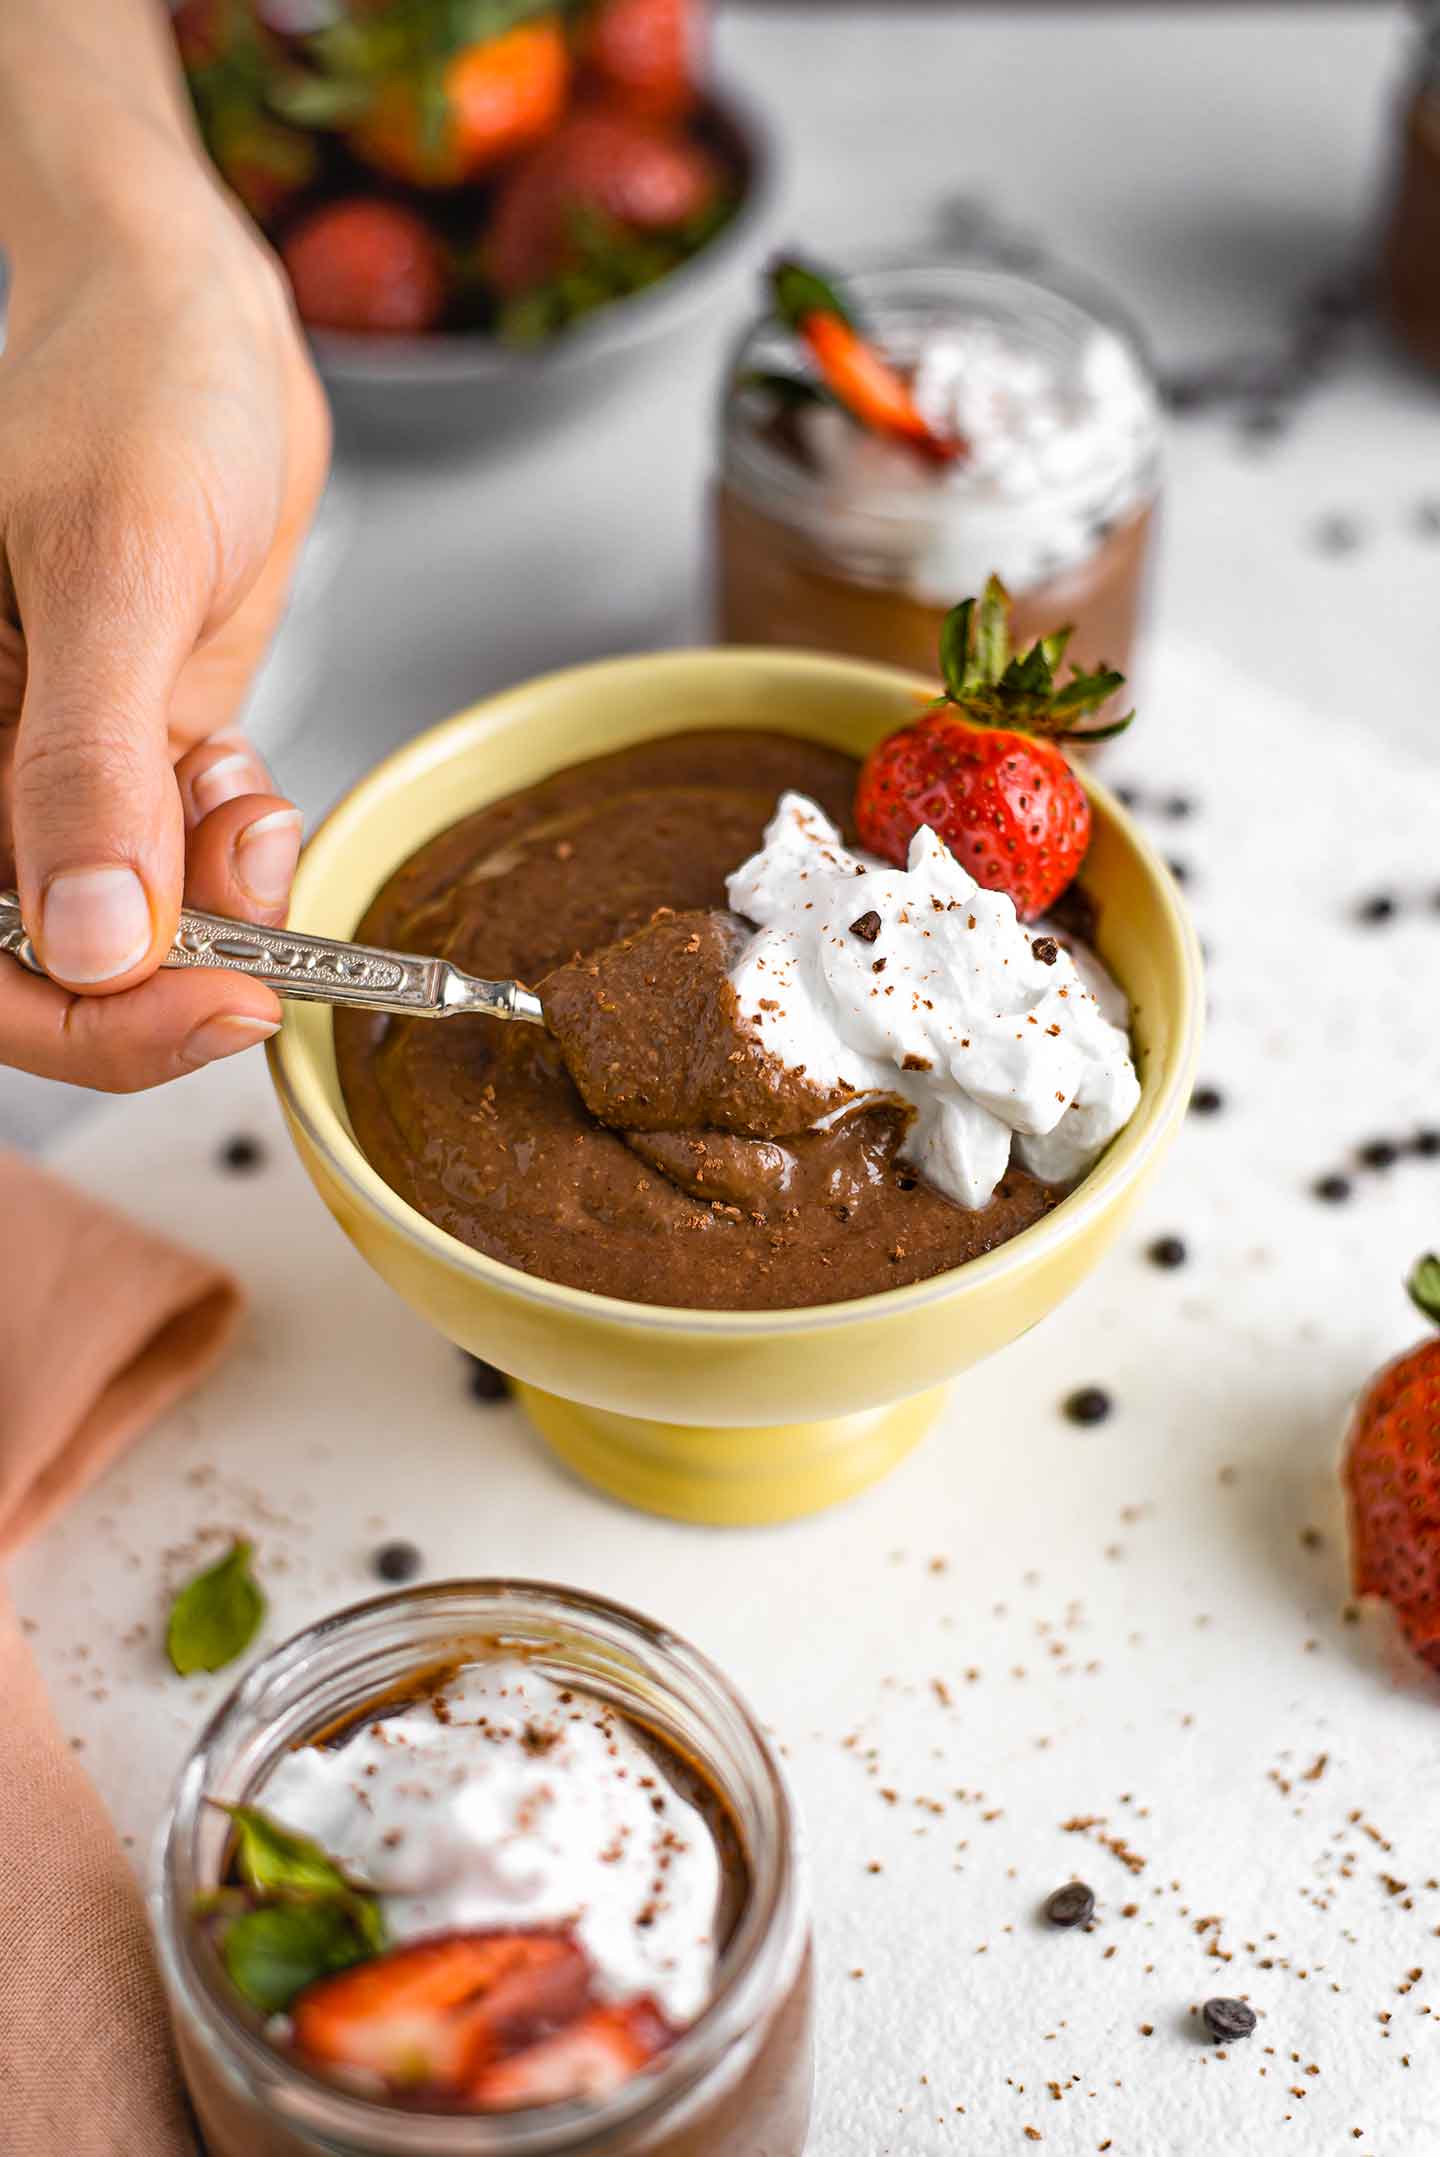 Side view of a hand using a spoon to scoop chocolate pudding topped with coconut whipped cream.